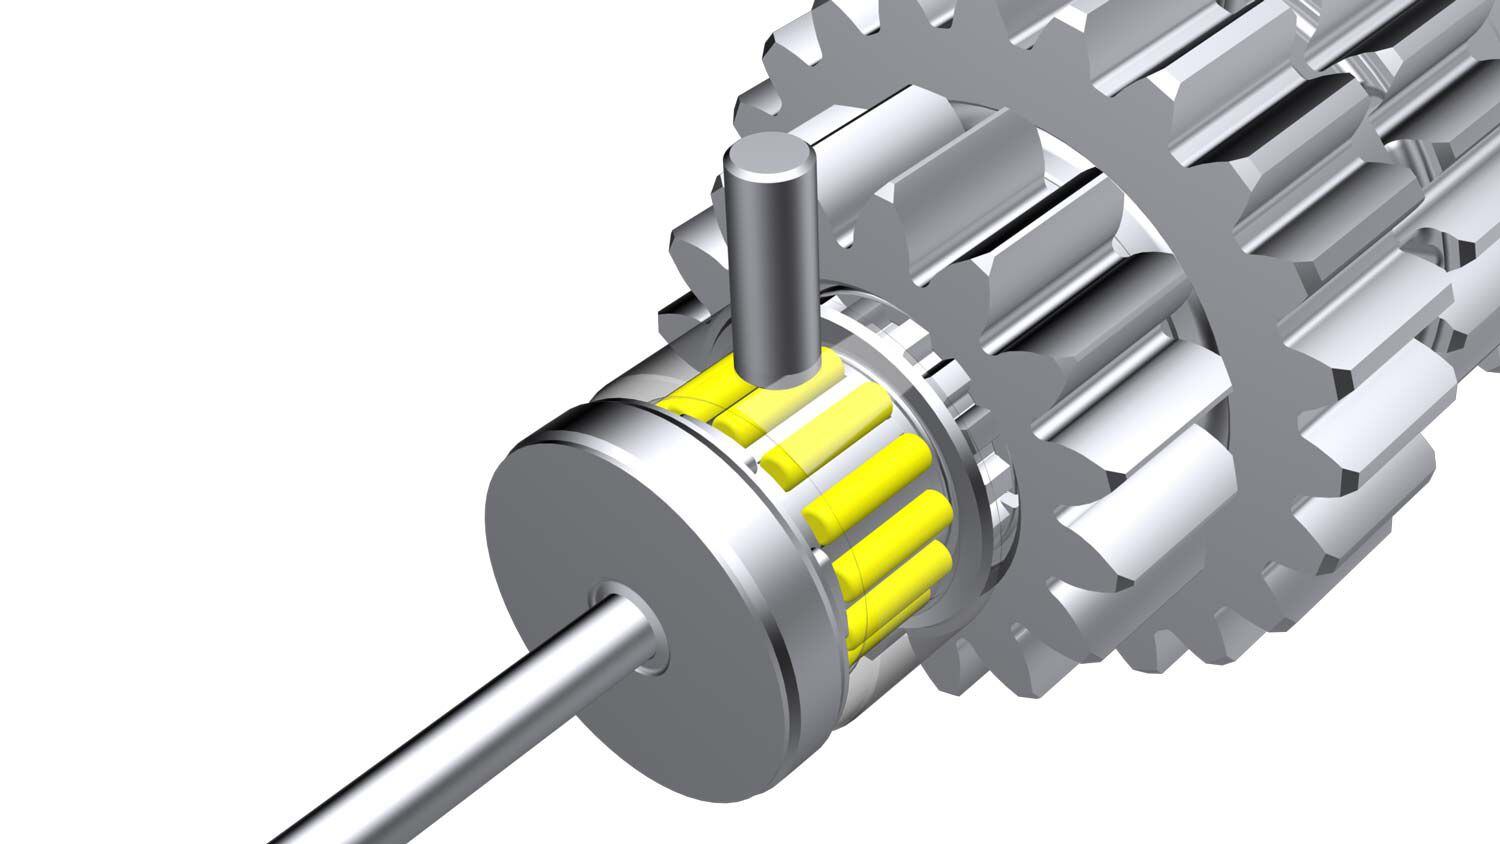 A new gearbox needle roller bearing featuring new longer rollers.